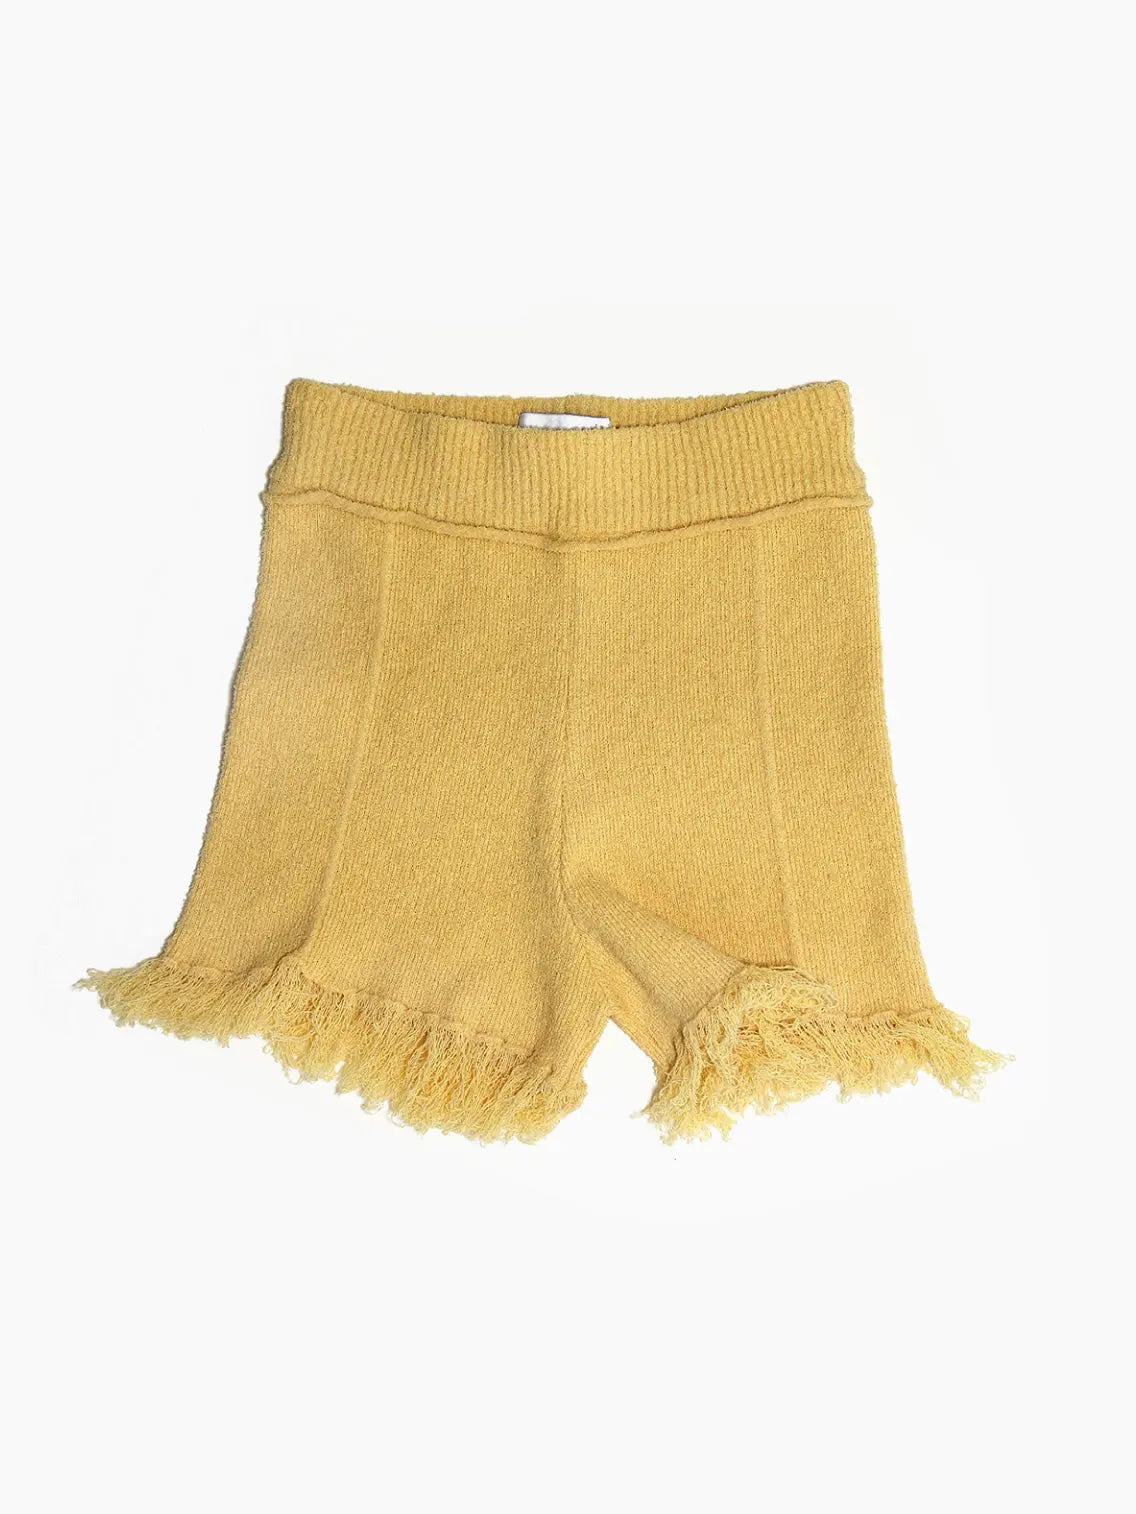 A pair of Soba Pants Yellow by Rus with a ribbed waistband and fringed hems, available at Bassalstore. The pants feature vertical seam detailing and are laid flat on a white background.